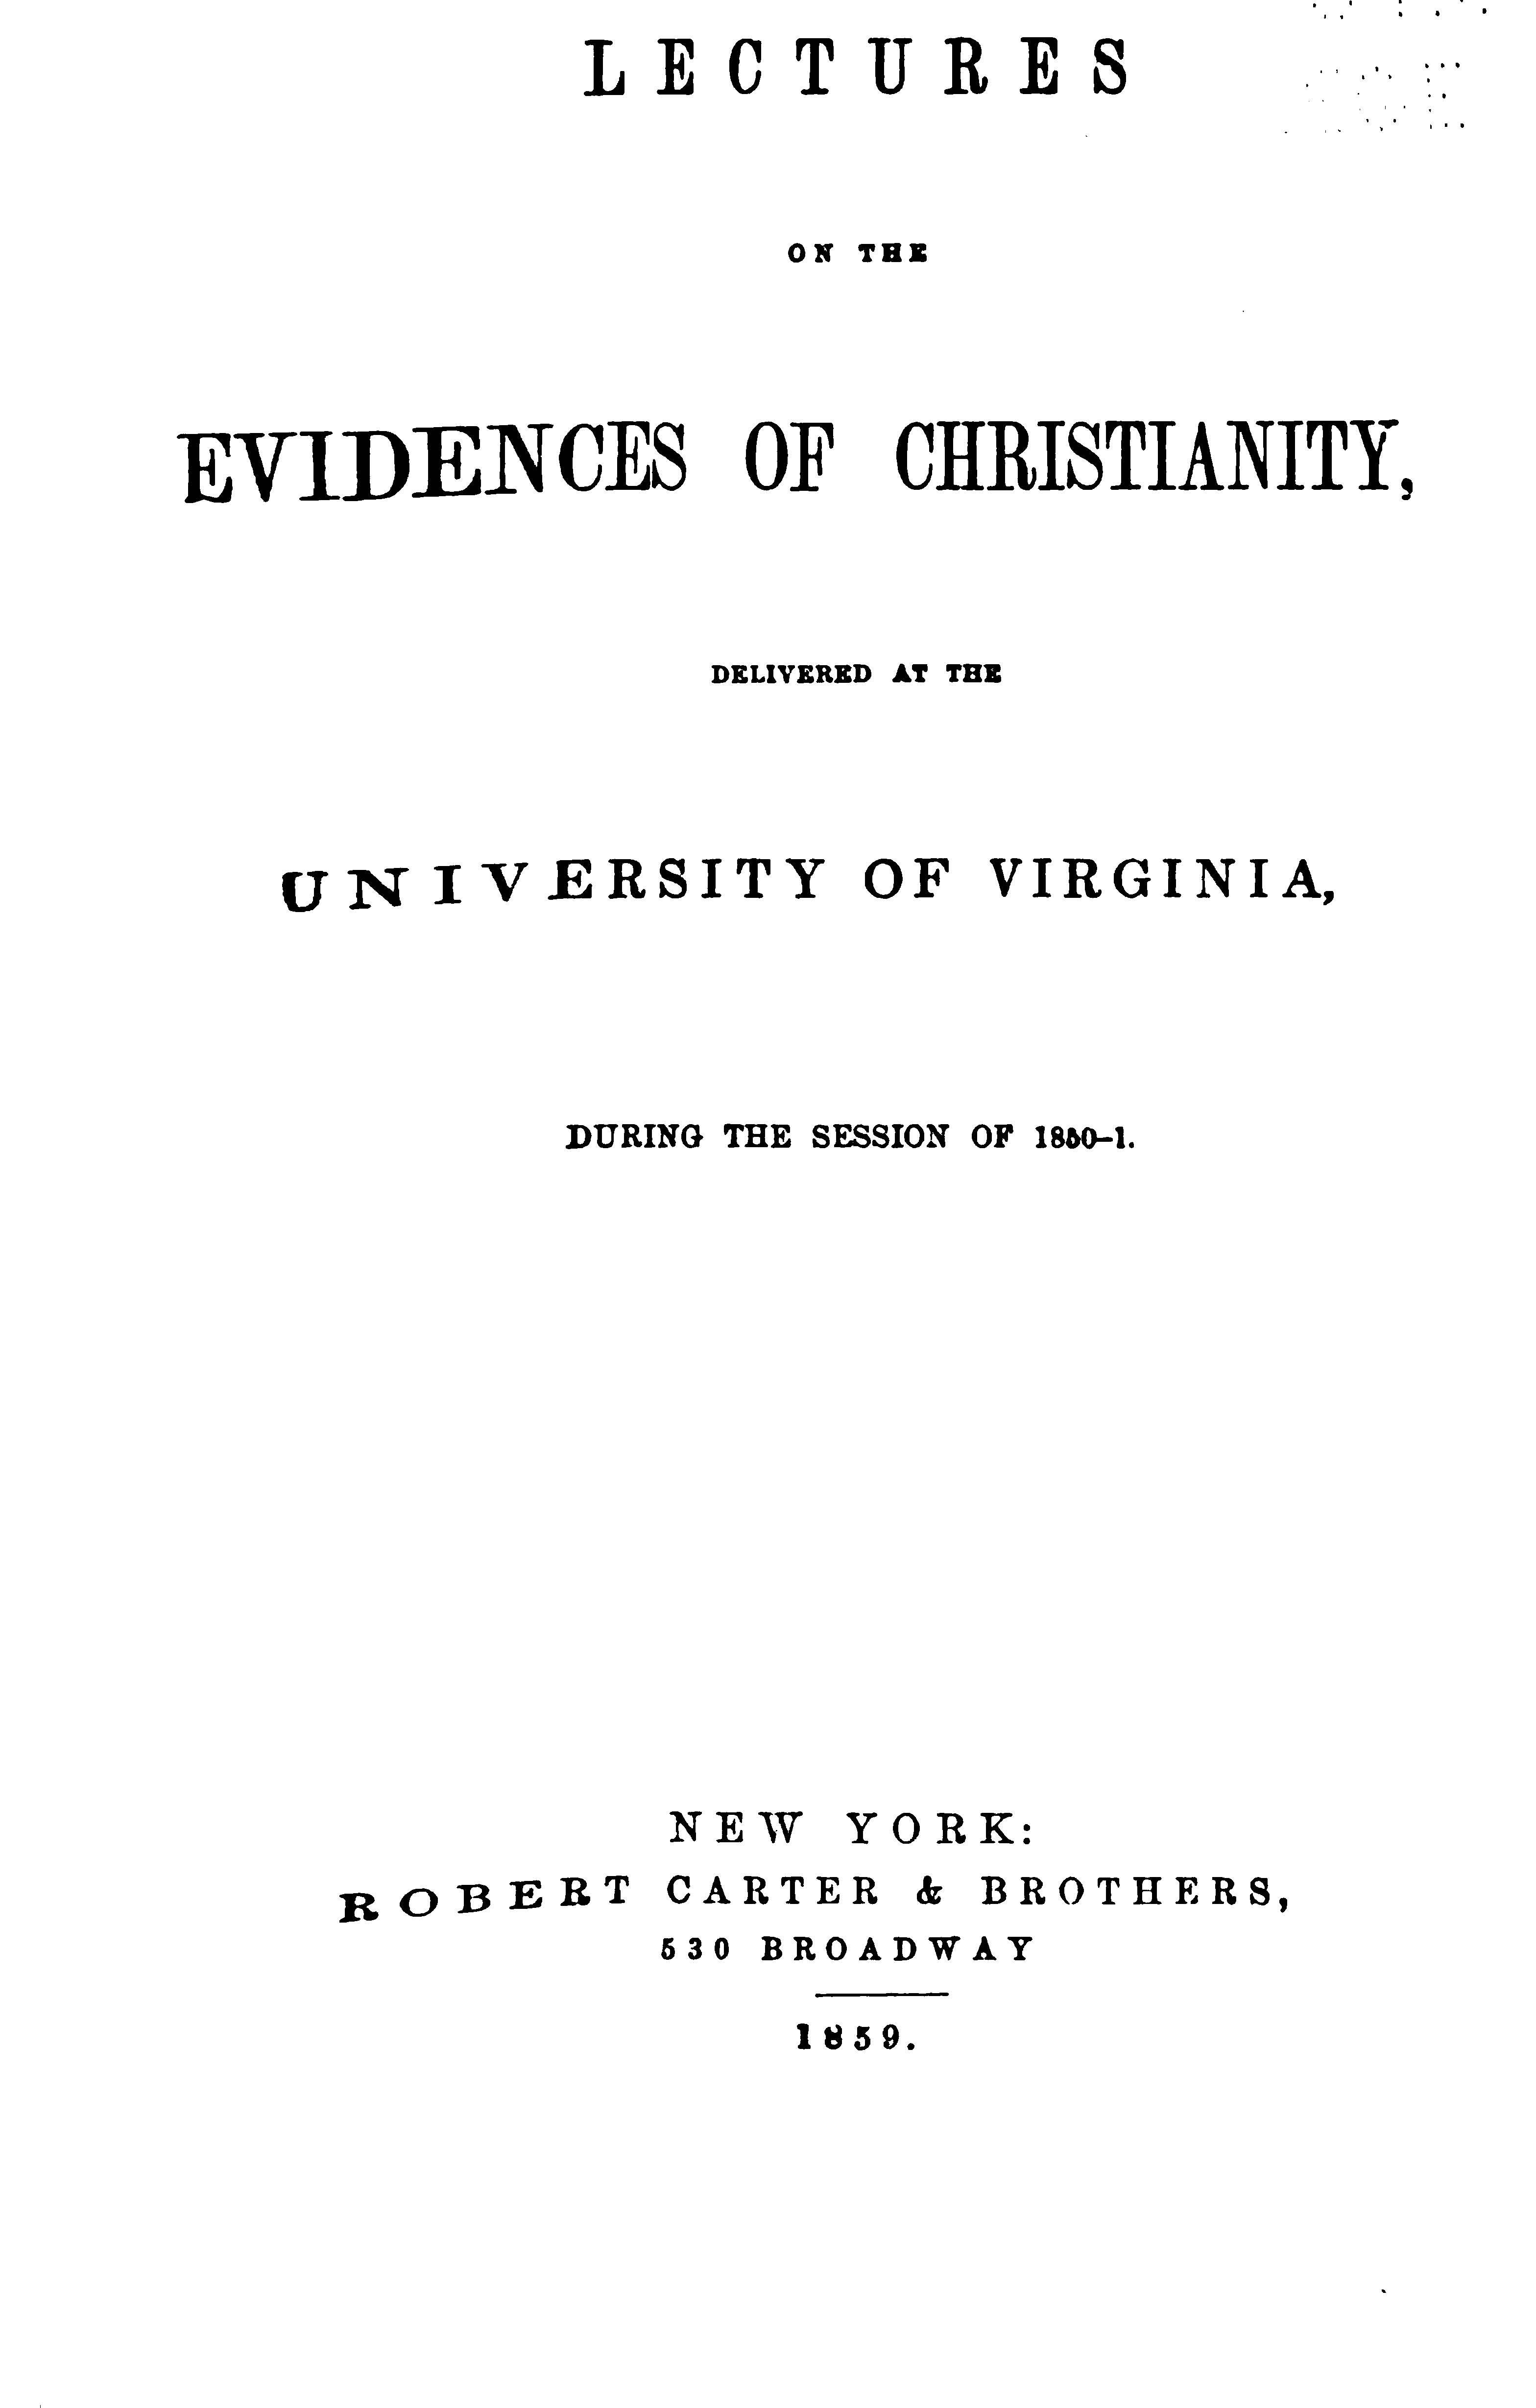 Lectures on the evidences of Christianity